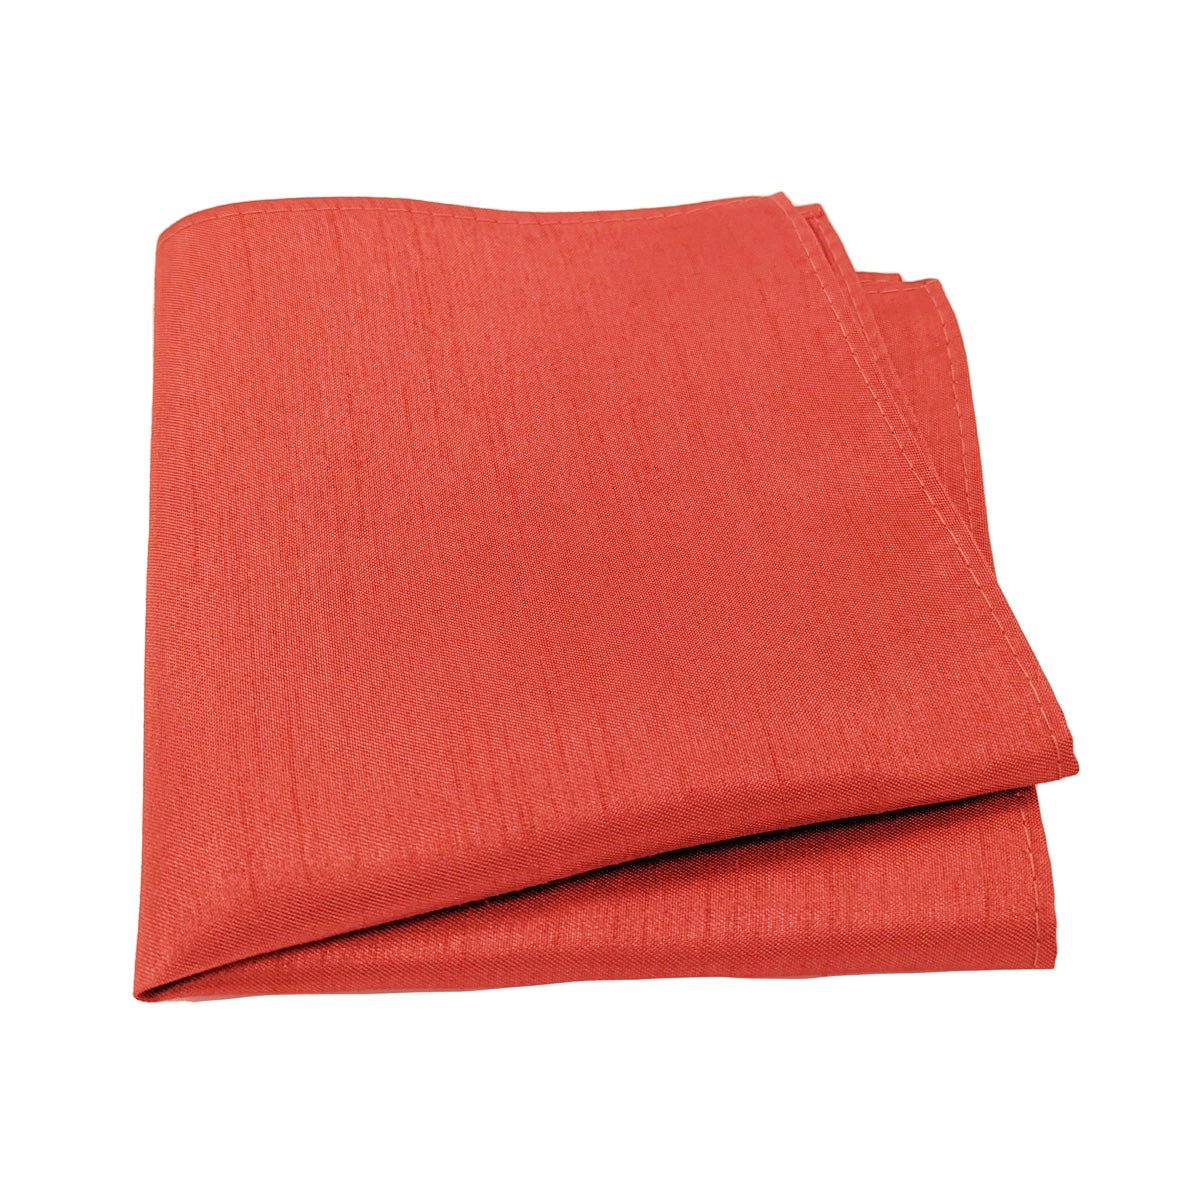 Maple Shantung Pocket Square - Wedding Pocket Square - - Swagger & Swoon